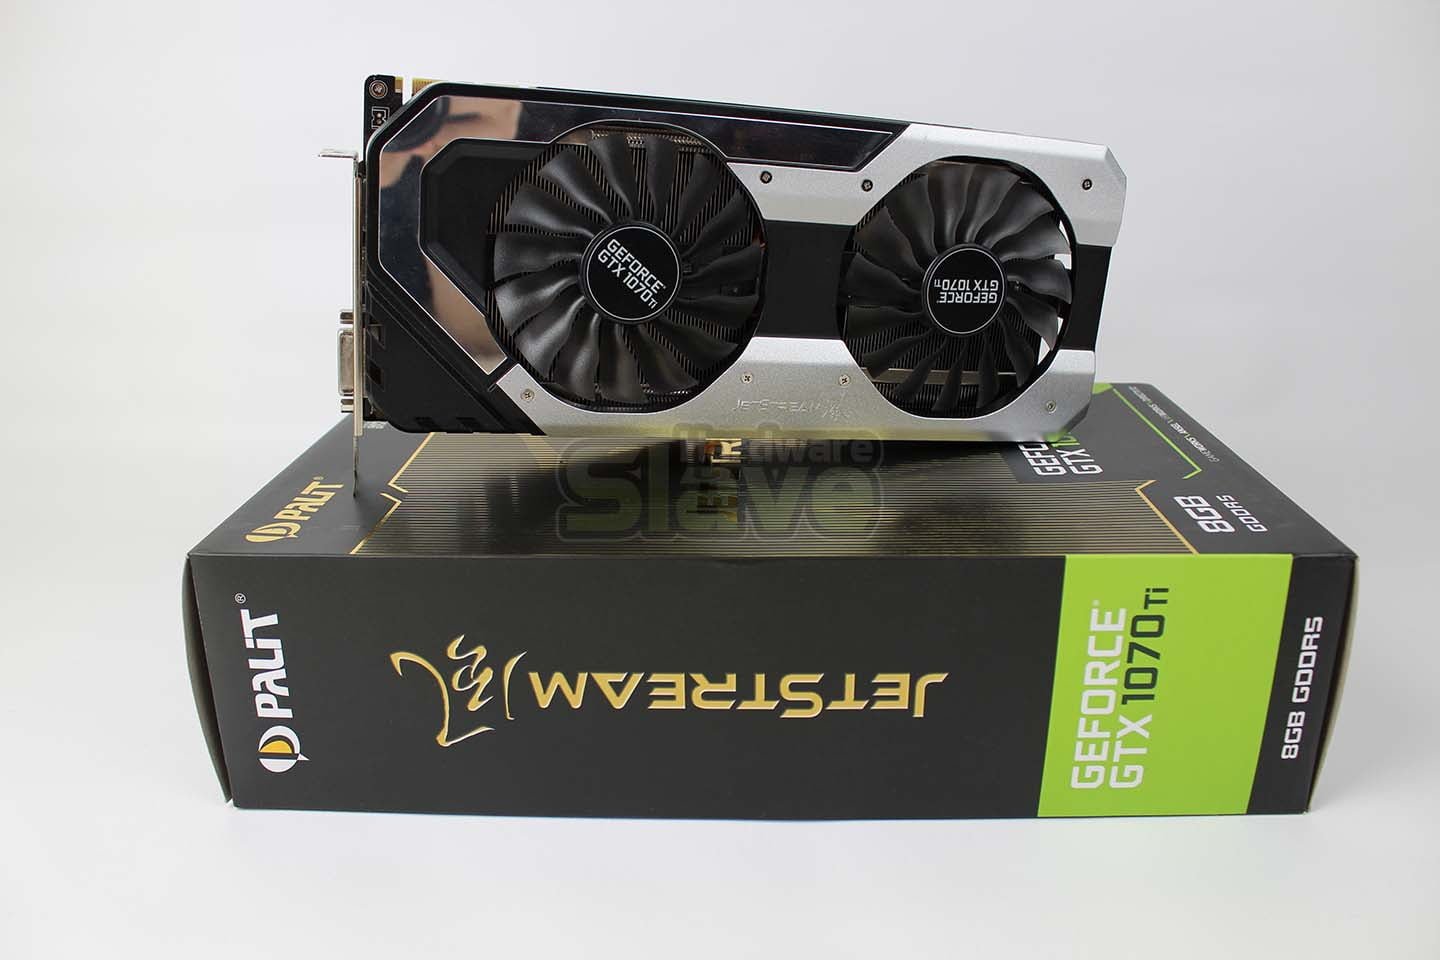 Palit GeForce GTX 1070 Ti JetStream Graphics Card Review - Page 9